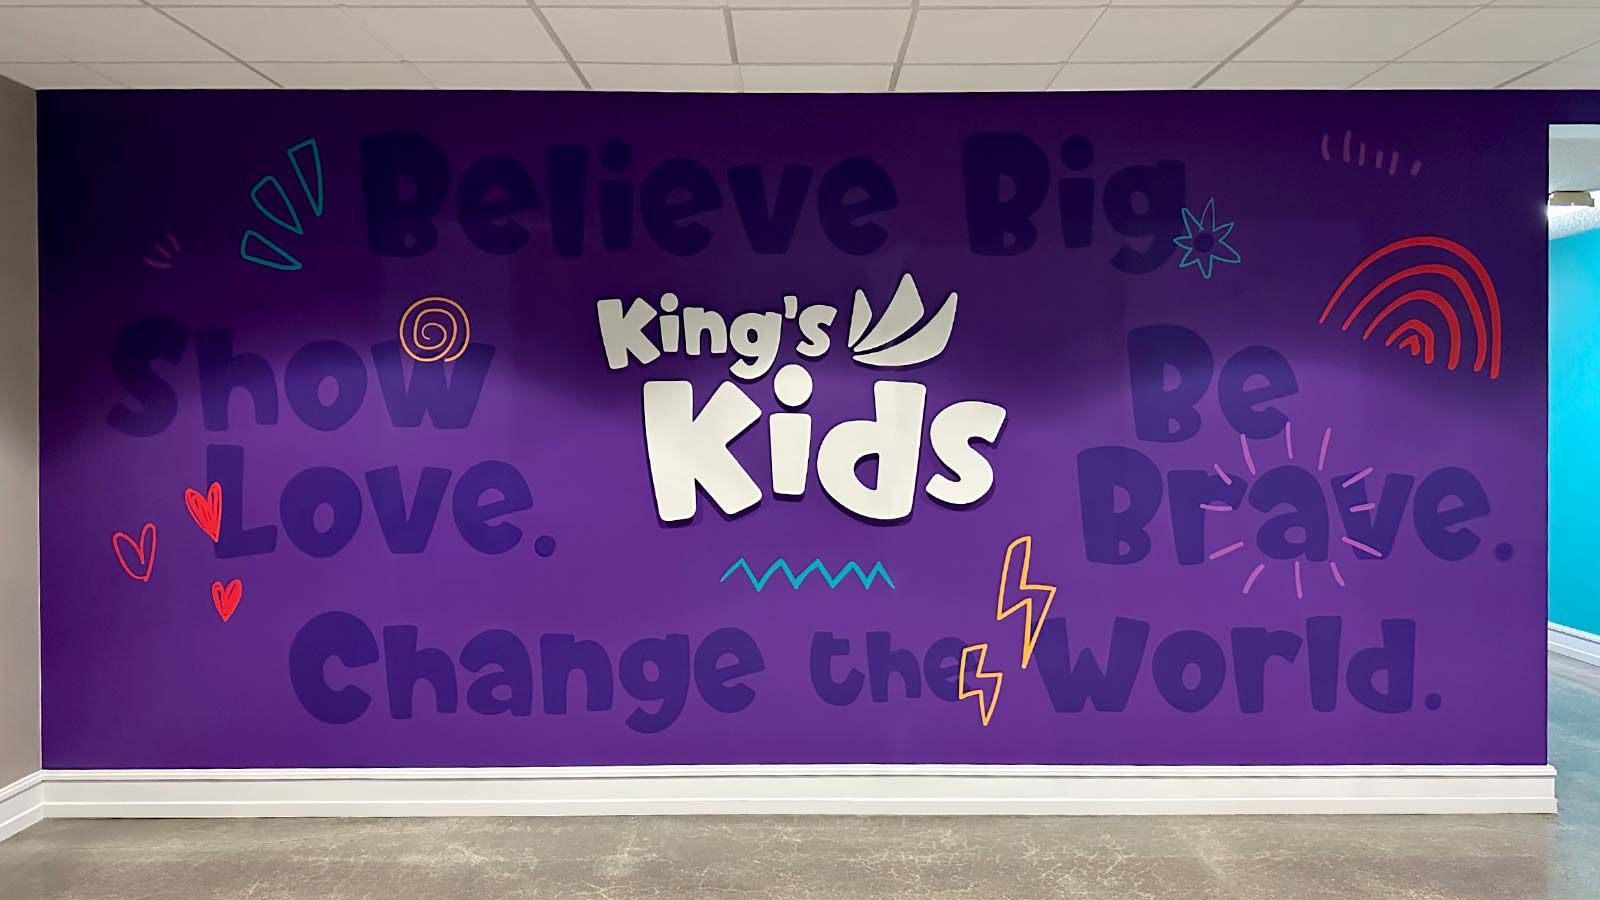 King's Kids office signs attached to the wall